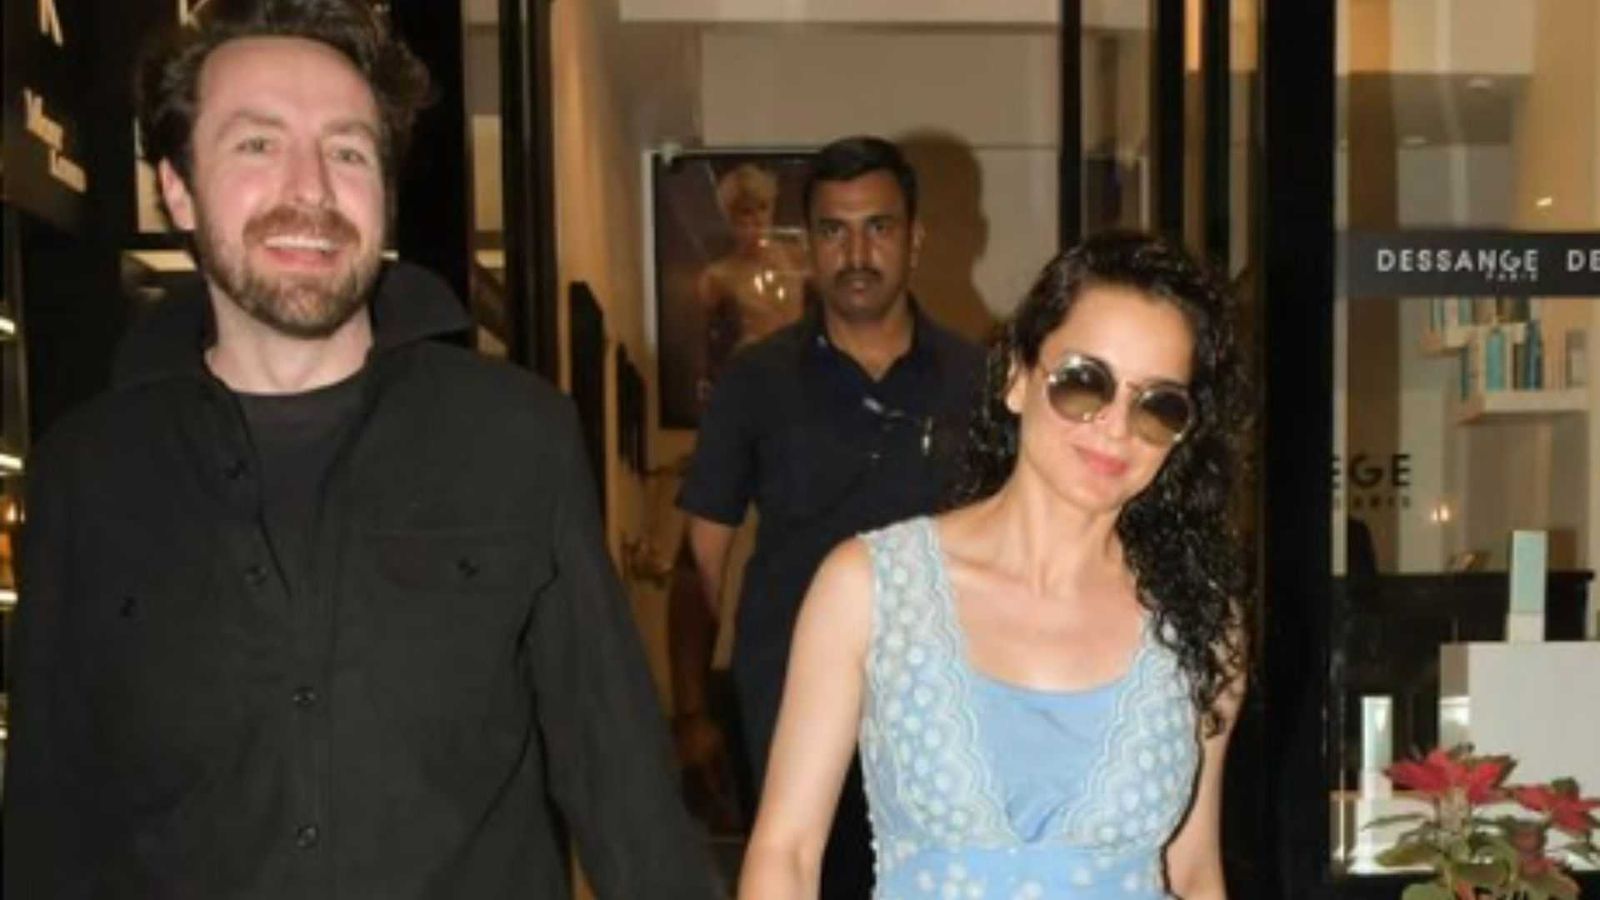 'Tried to find Hrithik lookalike': Kangana Ranaut sparks dating rumours with a mystery man, netizens have a field day